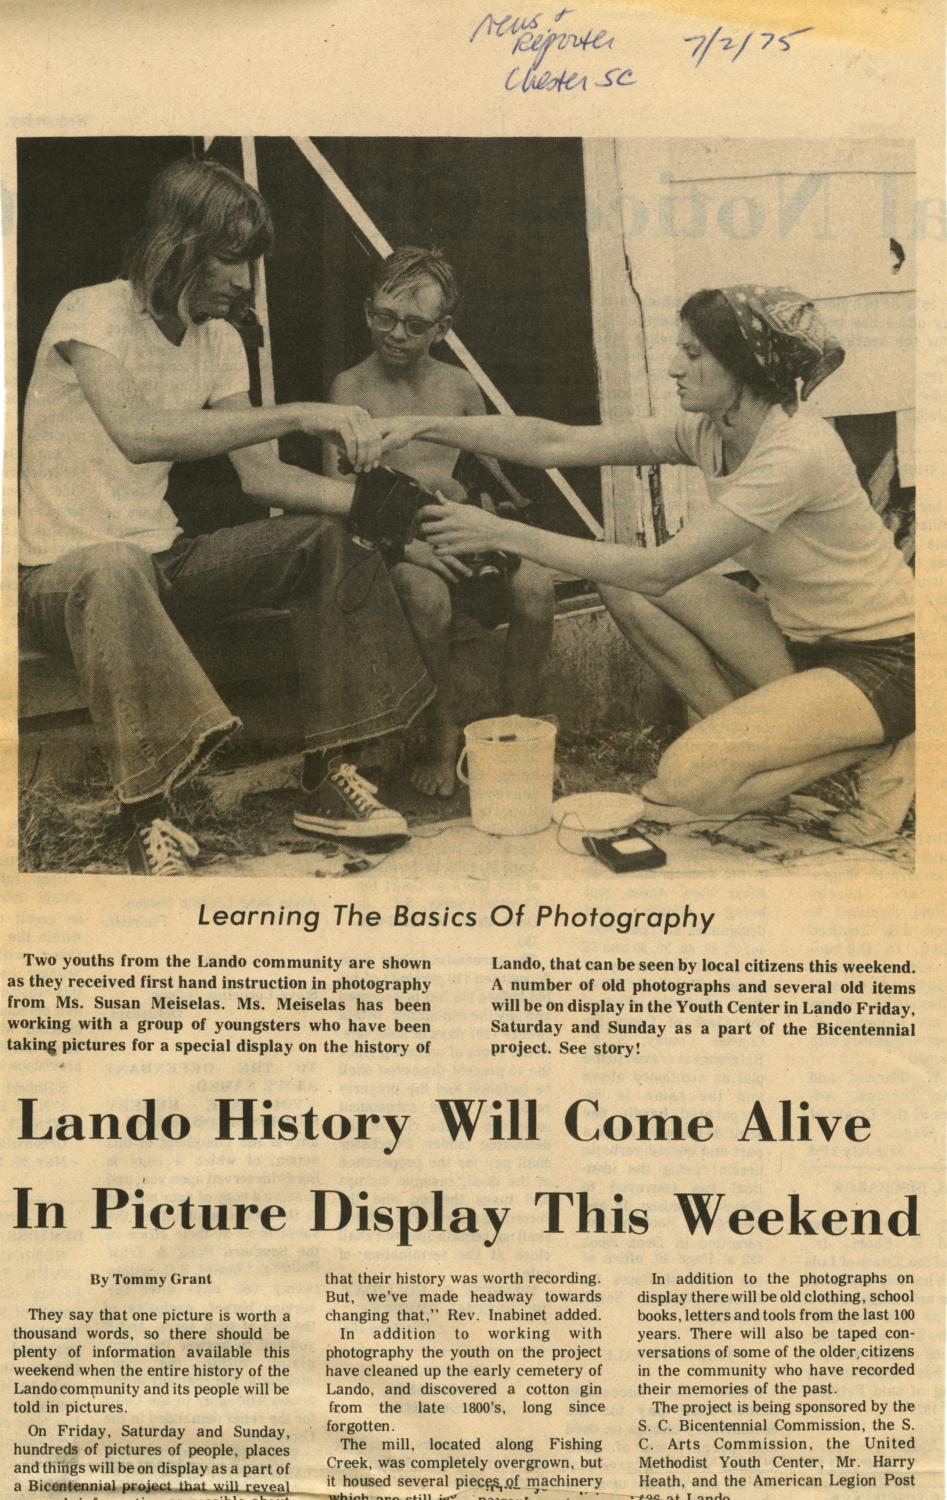 A Photographic Genealogy - The History of Lando - Newspaper clipping from Chester, South Carolina,  Lando...